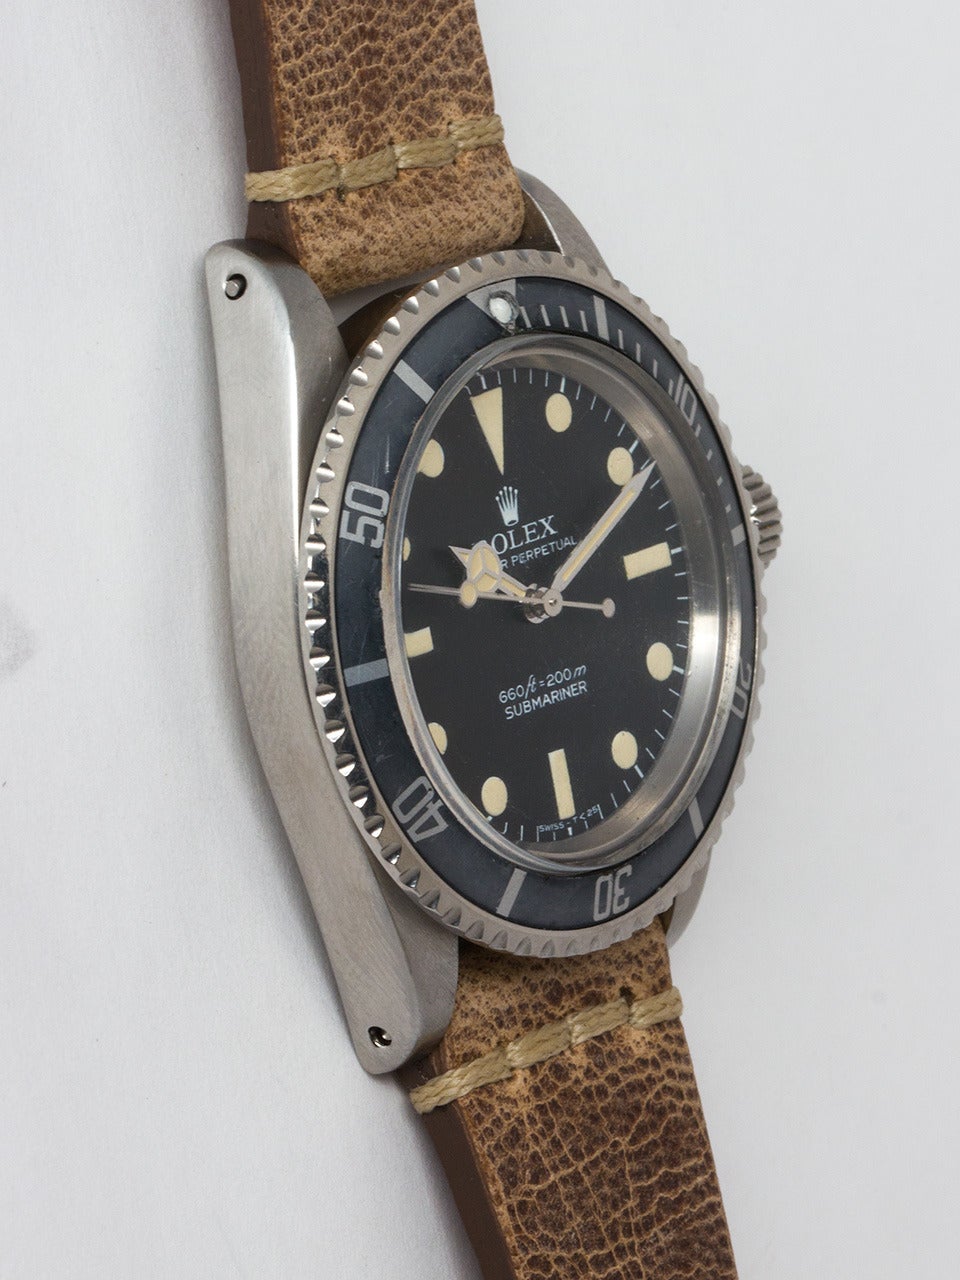 Rolex Stainless Steel Submariner Wristwatch ref 5513 serial #3.2 million circa 1972. 40mm diameter Oyster case with nicely faded 